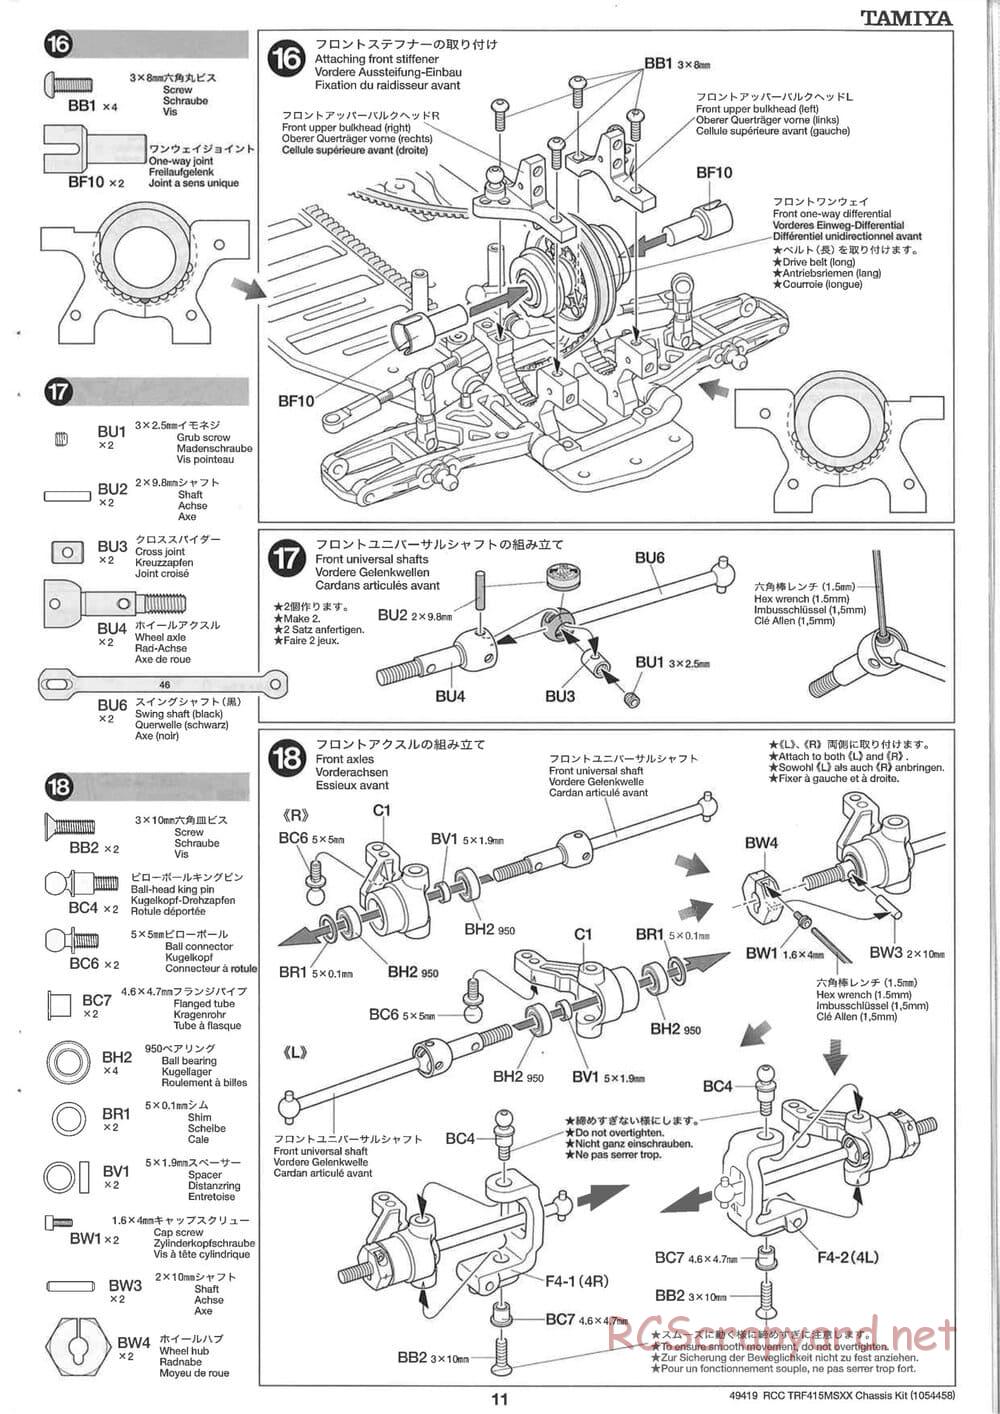 Tamiya - TRF415-MSXX Chassis - Manual - Page 11